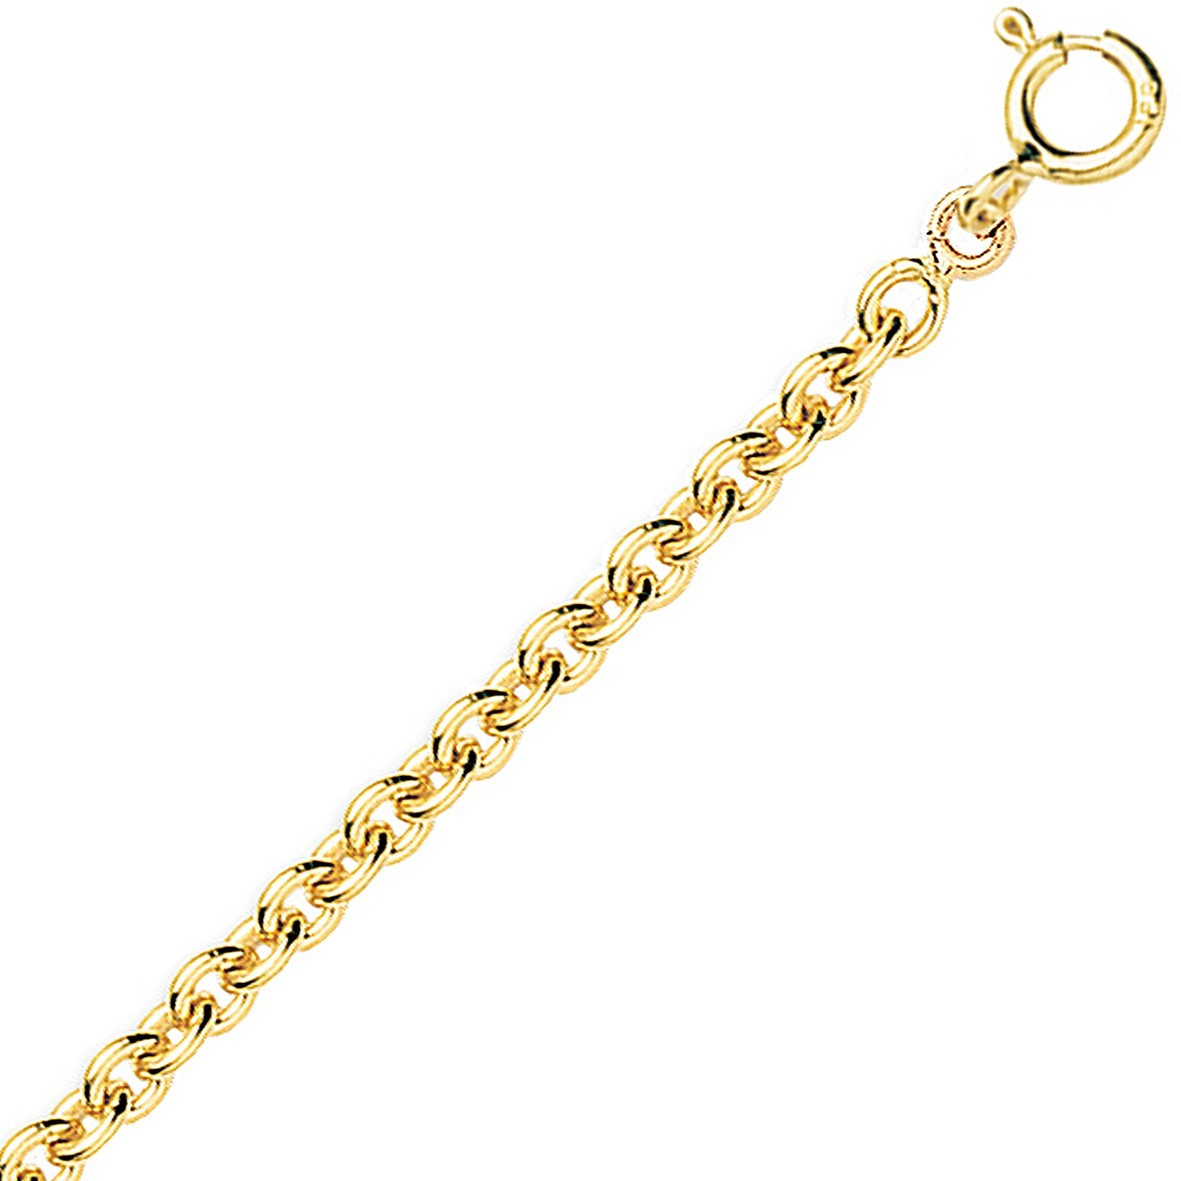 Chaine or jaune 18k maille forçat ronde 1,64mm